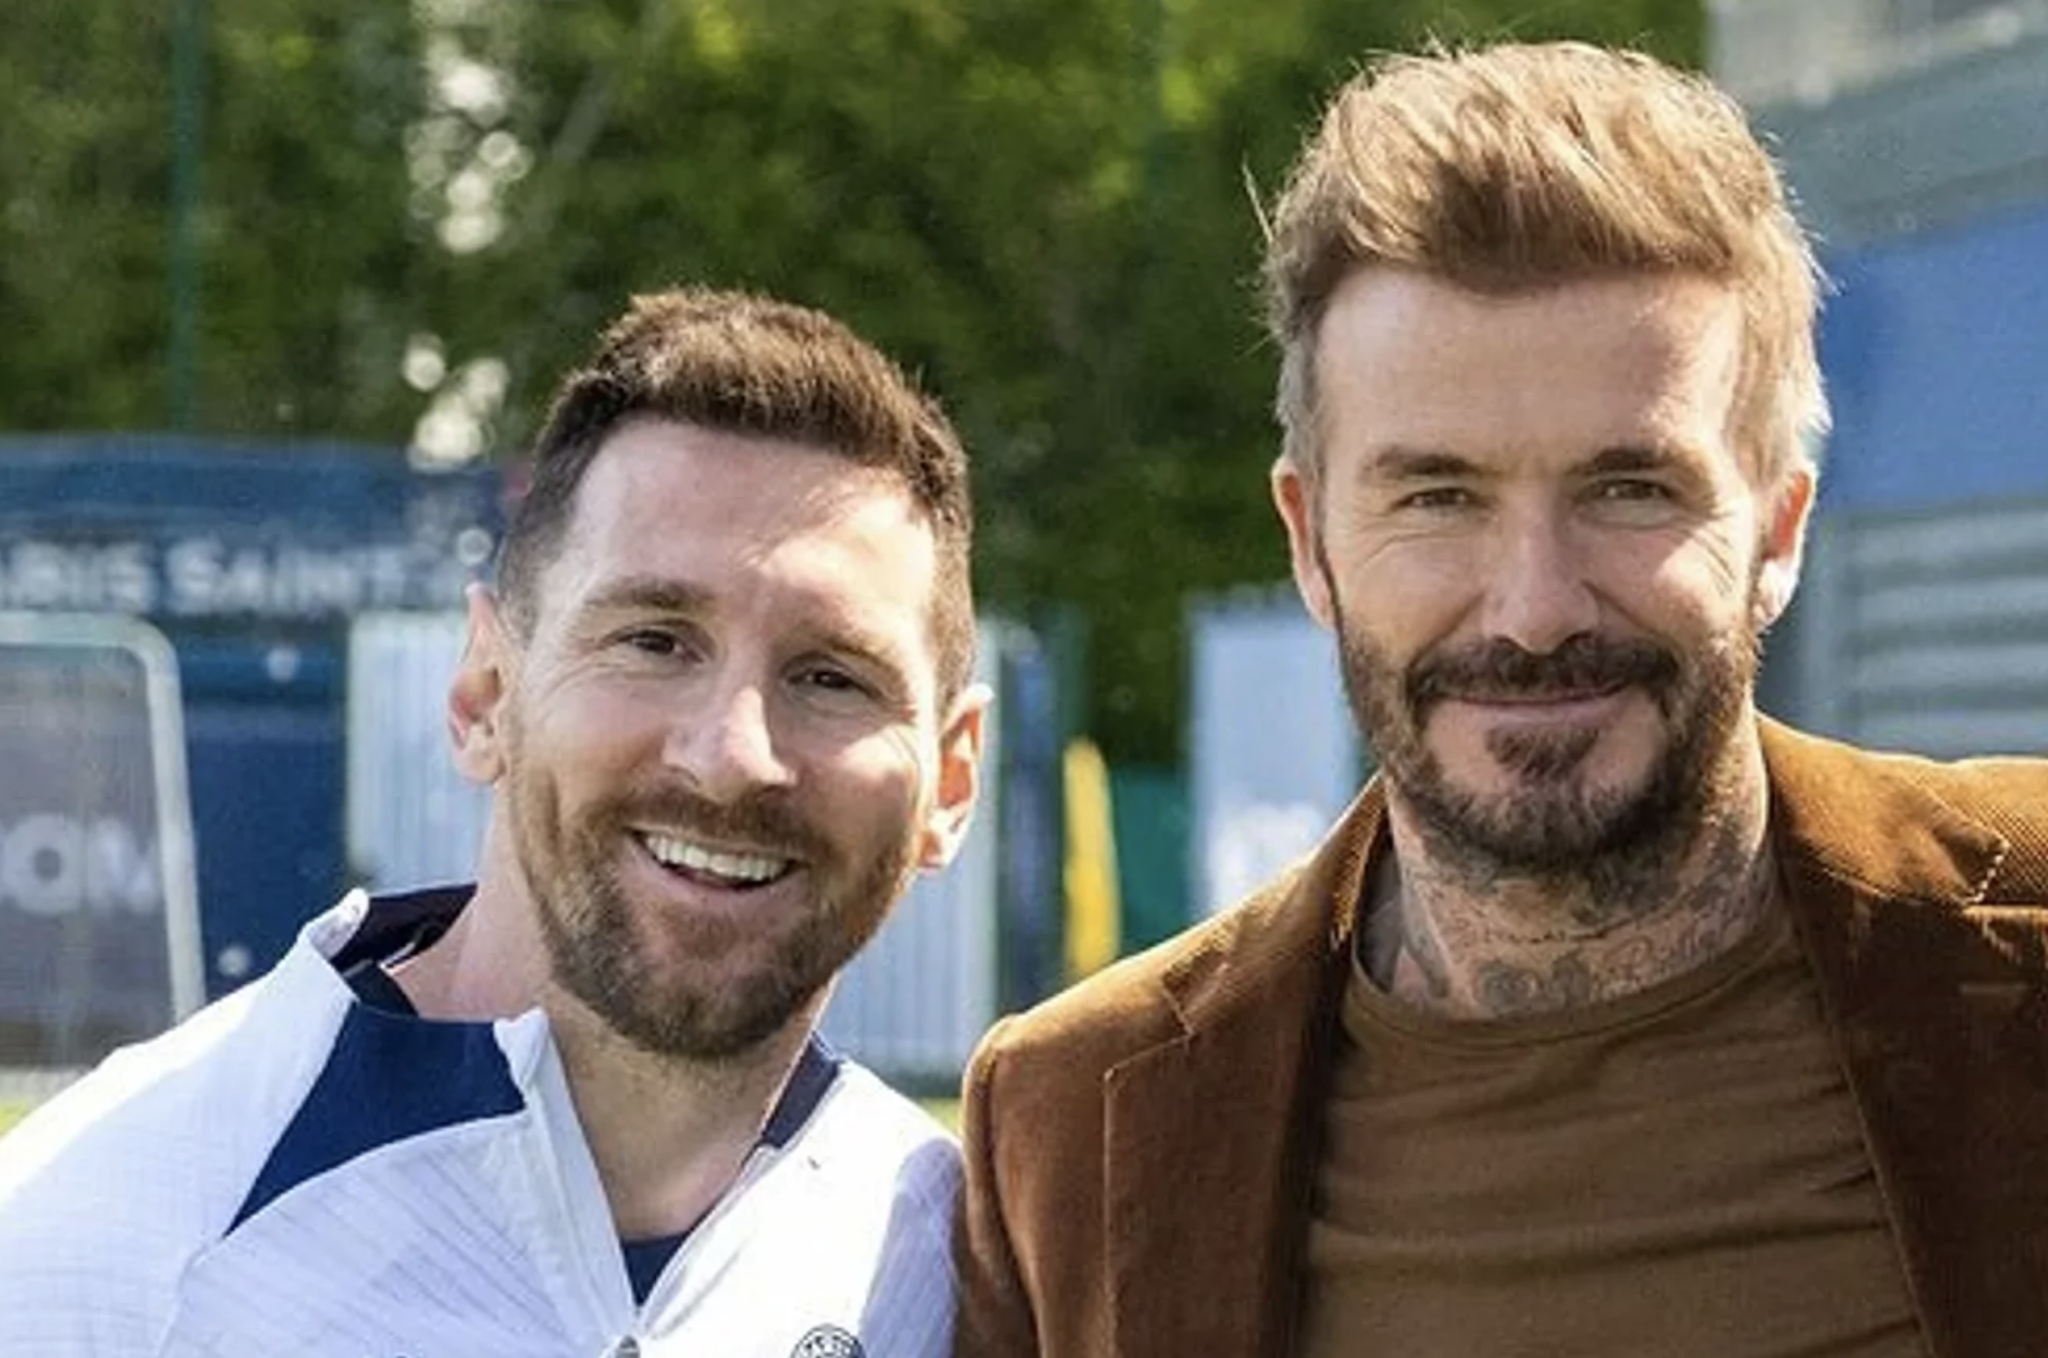 David Beckham and Lionel Messi: The day Messi forced Beckham to consider retirement